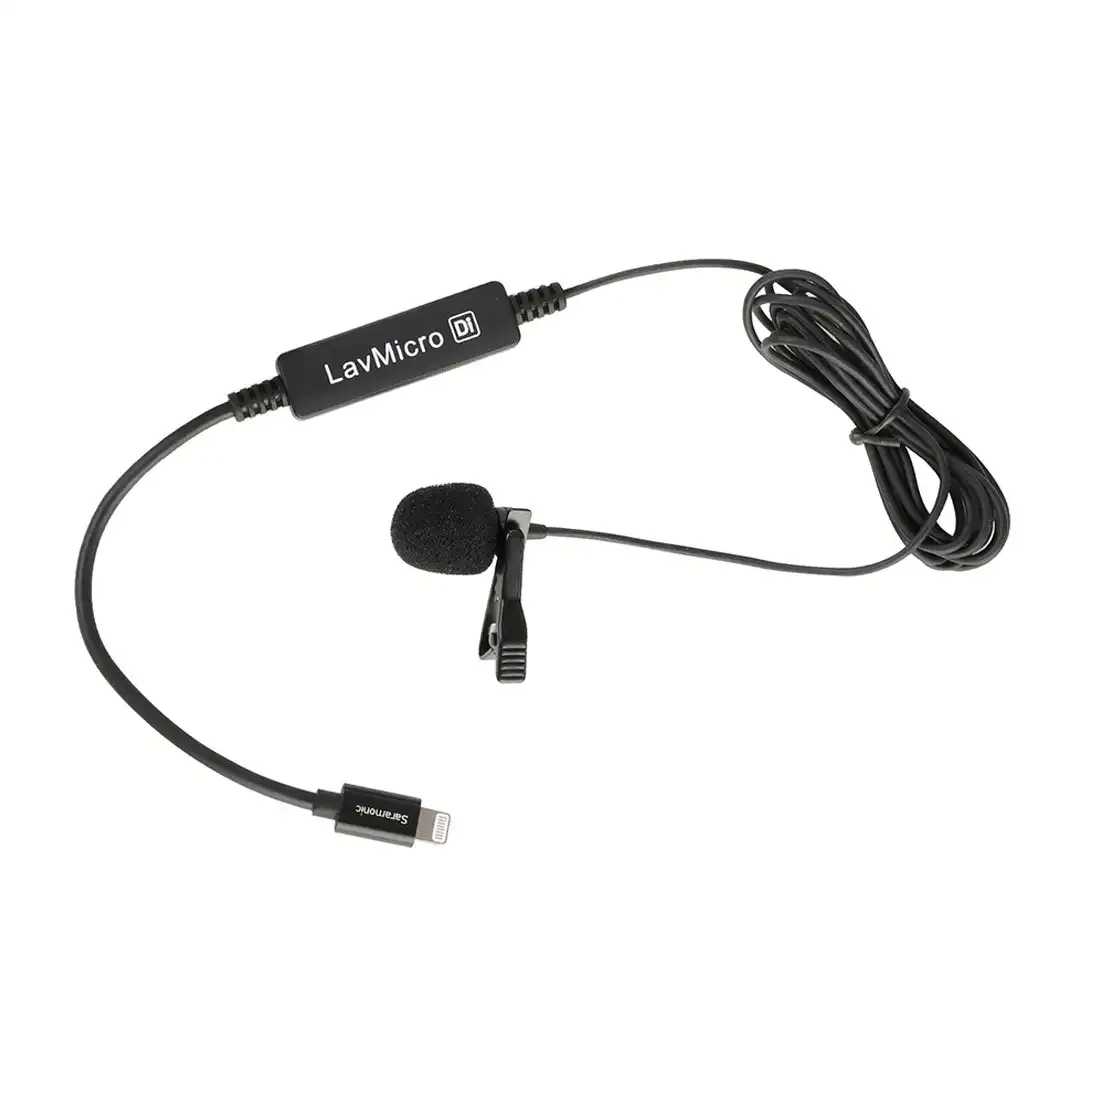 Saramonic LavMicro Di Lapel Microphone for Lightning iOS Mobile Devices